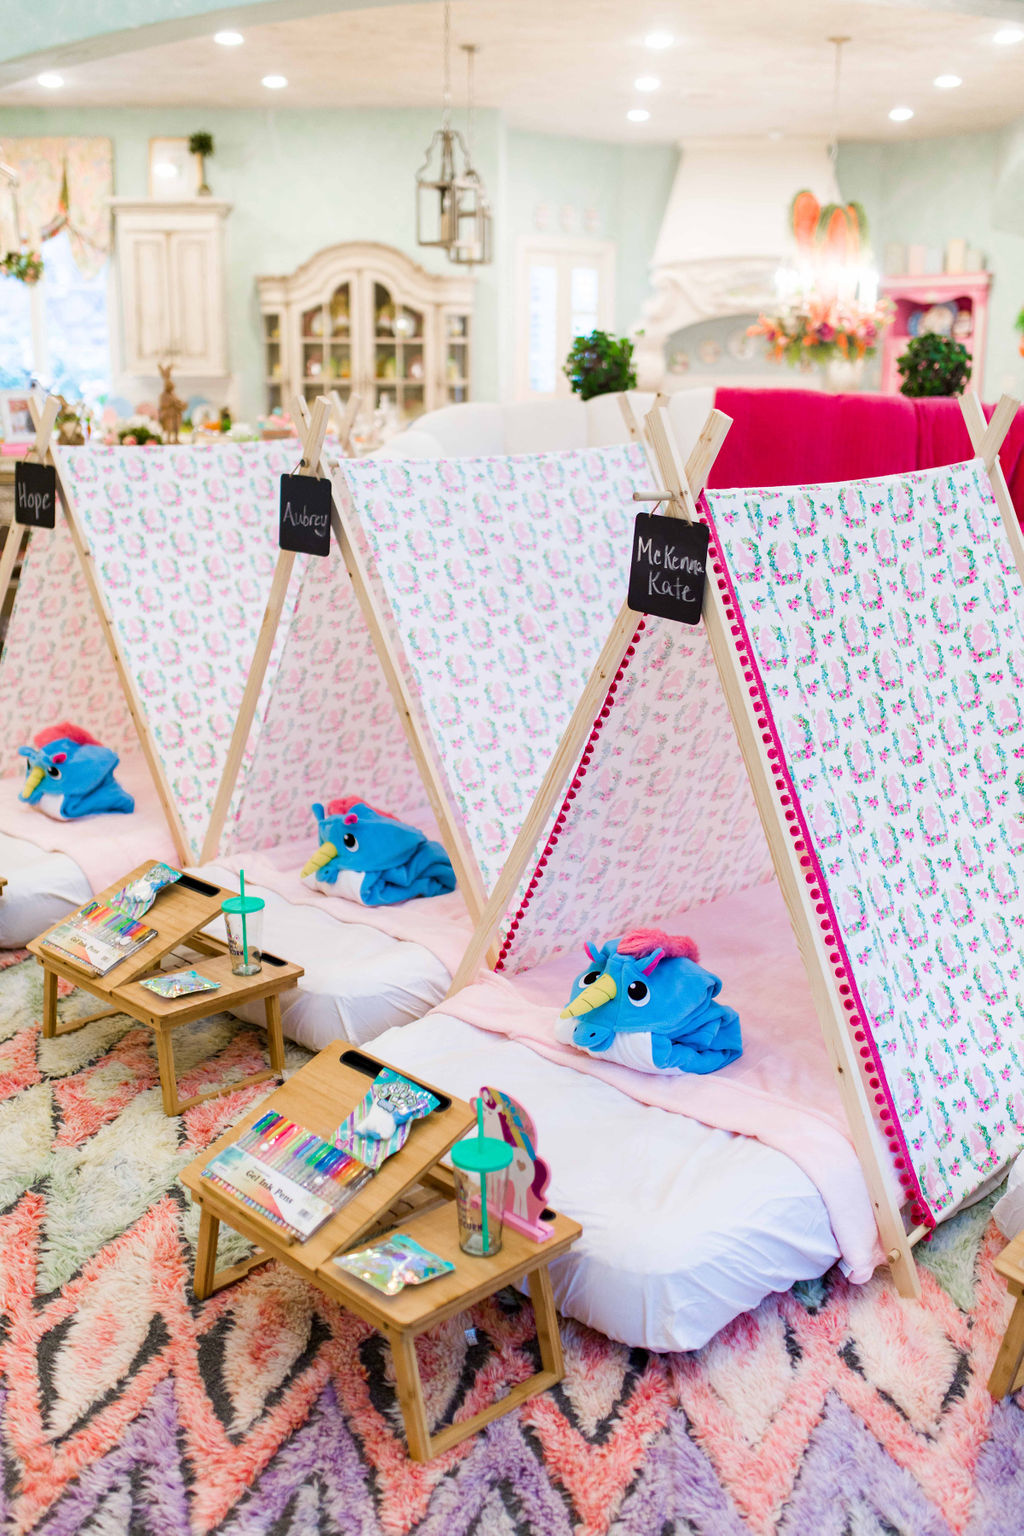 Turtle Creek Lane blog and interior decorator show how to do a unicorn birthday party with sleepover tents from Briarwood Design Co!